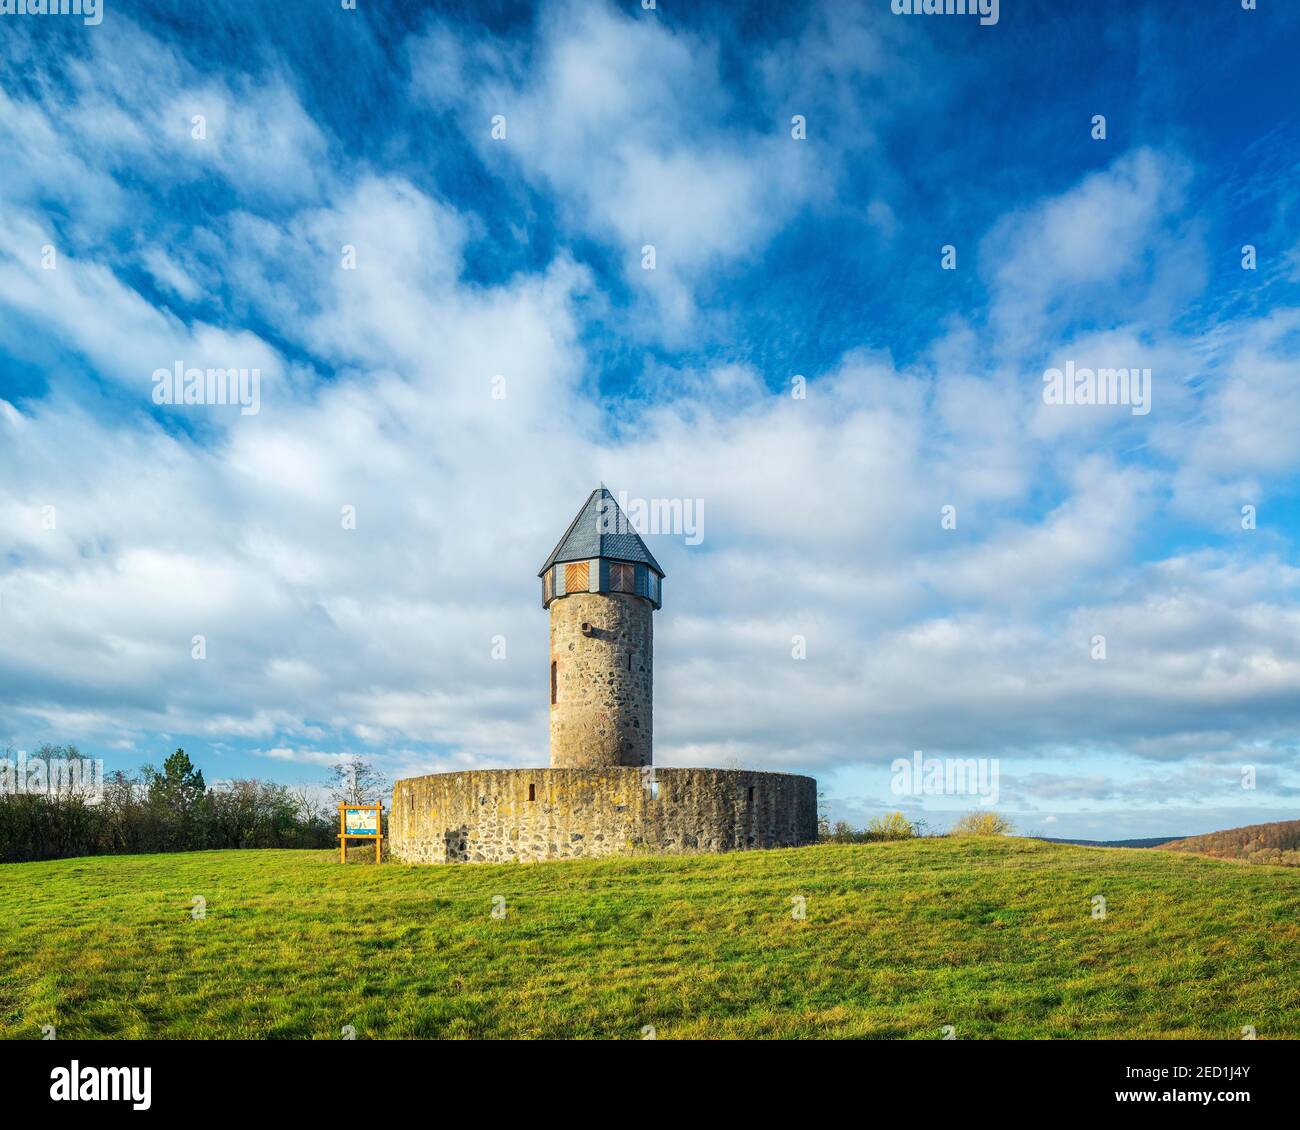 Hellenwarte, medieval watchtower with fly yard, Fritzlar, Hesse, Germany Stock Photo